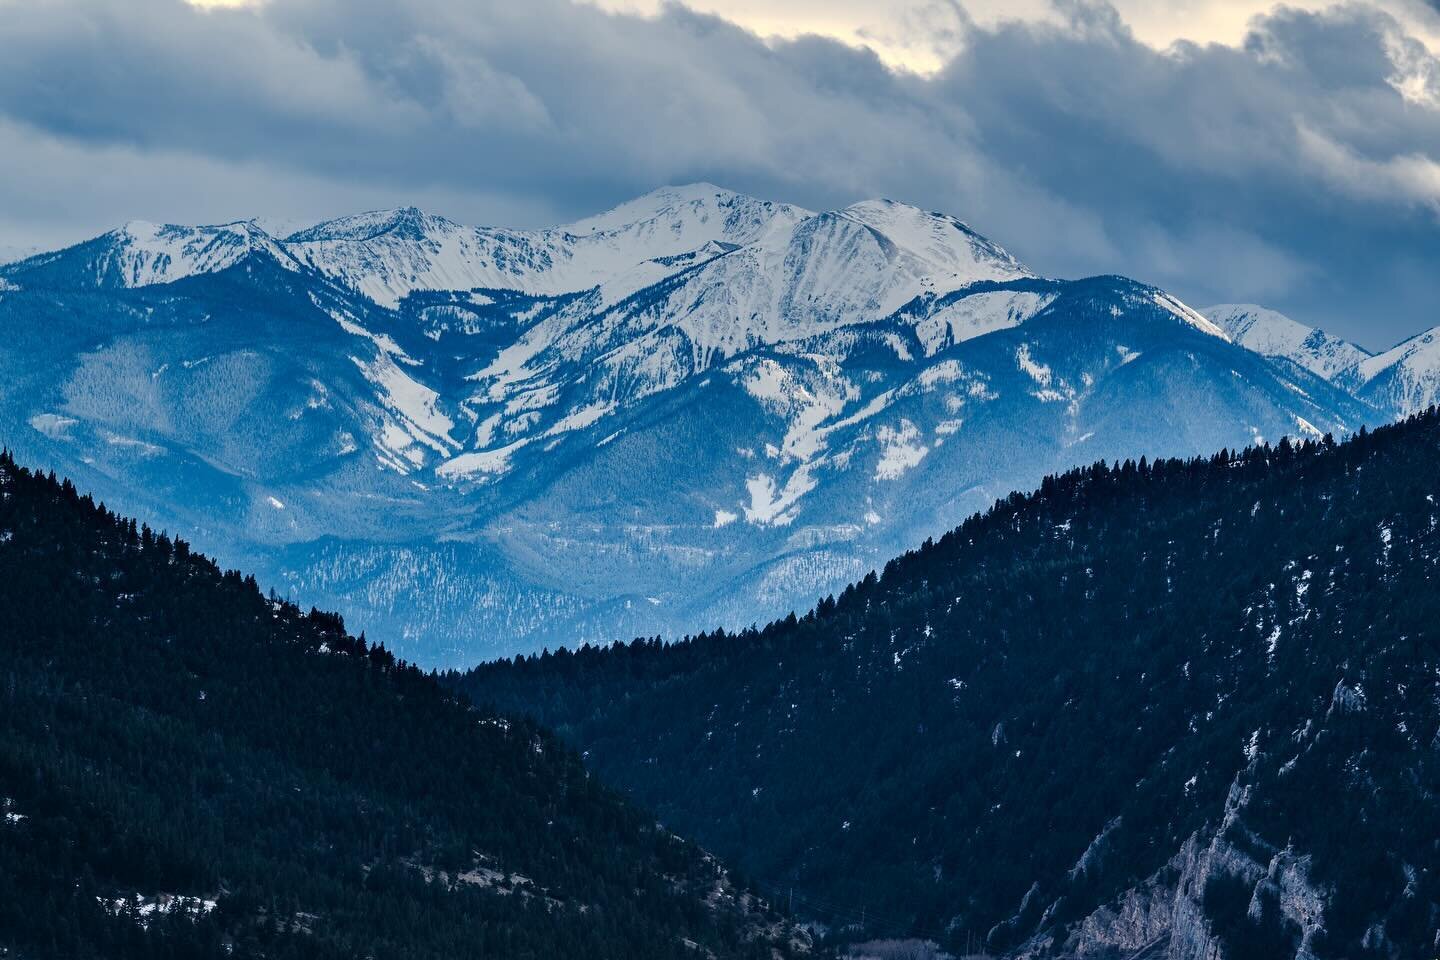 Close Up &amp; Personal, with the Absaroka Mountains.  RIP Toby Keith
.
#explorelivingstonmt #absarokabeartoothwilderness #livingstonpeak #mountbaldy #snowcovered #majesticmountains #freshpowder #montanamoment #yellowstone #yellowstonecountry